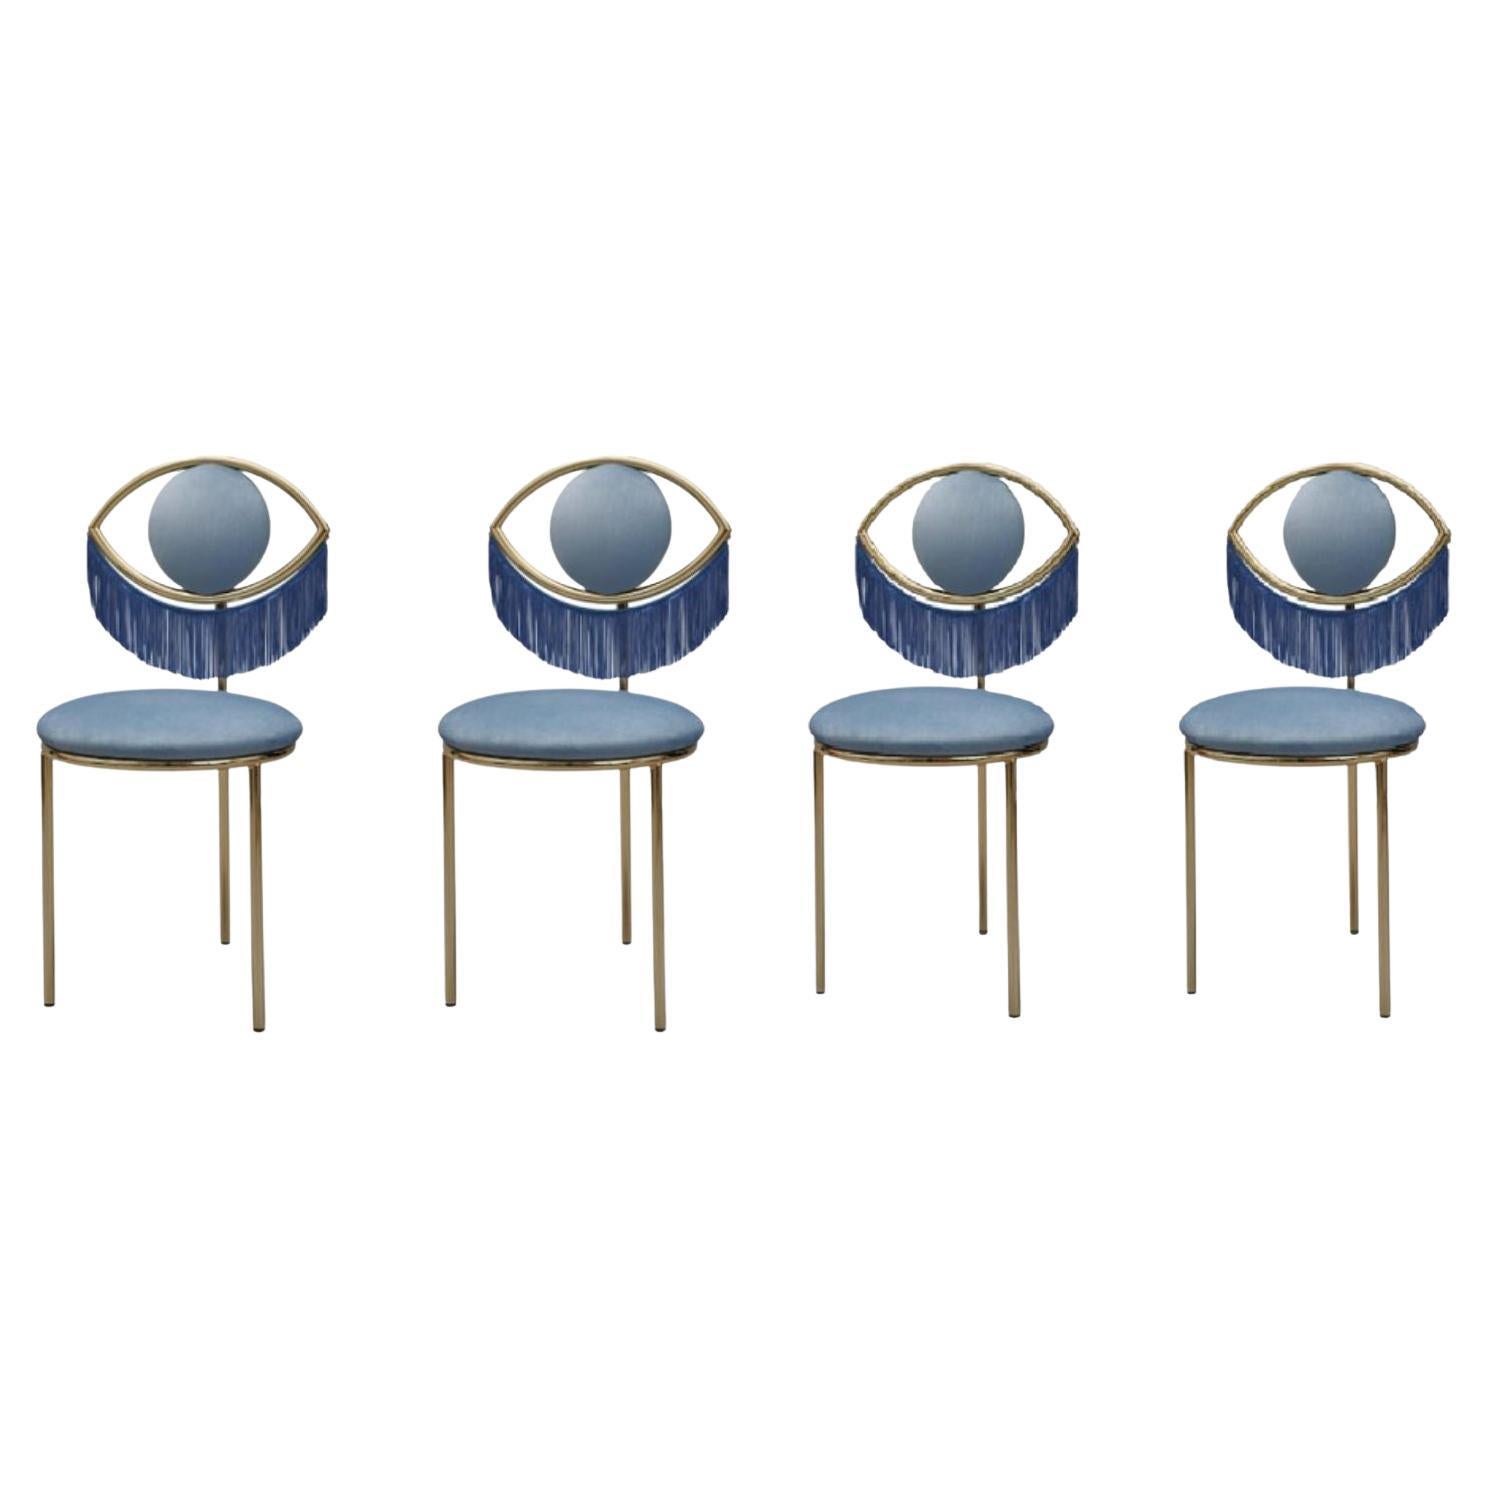 Set of 4 Wink Chairs by Masquespacio